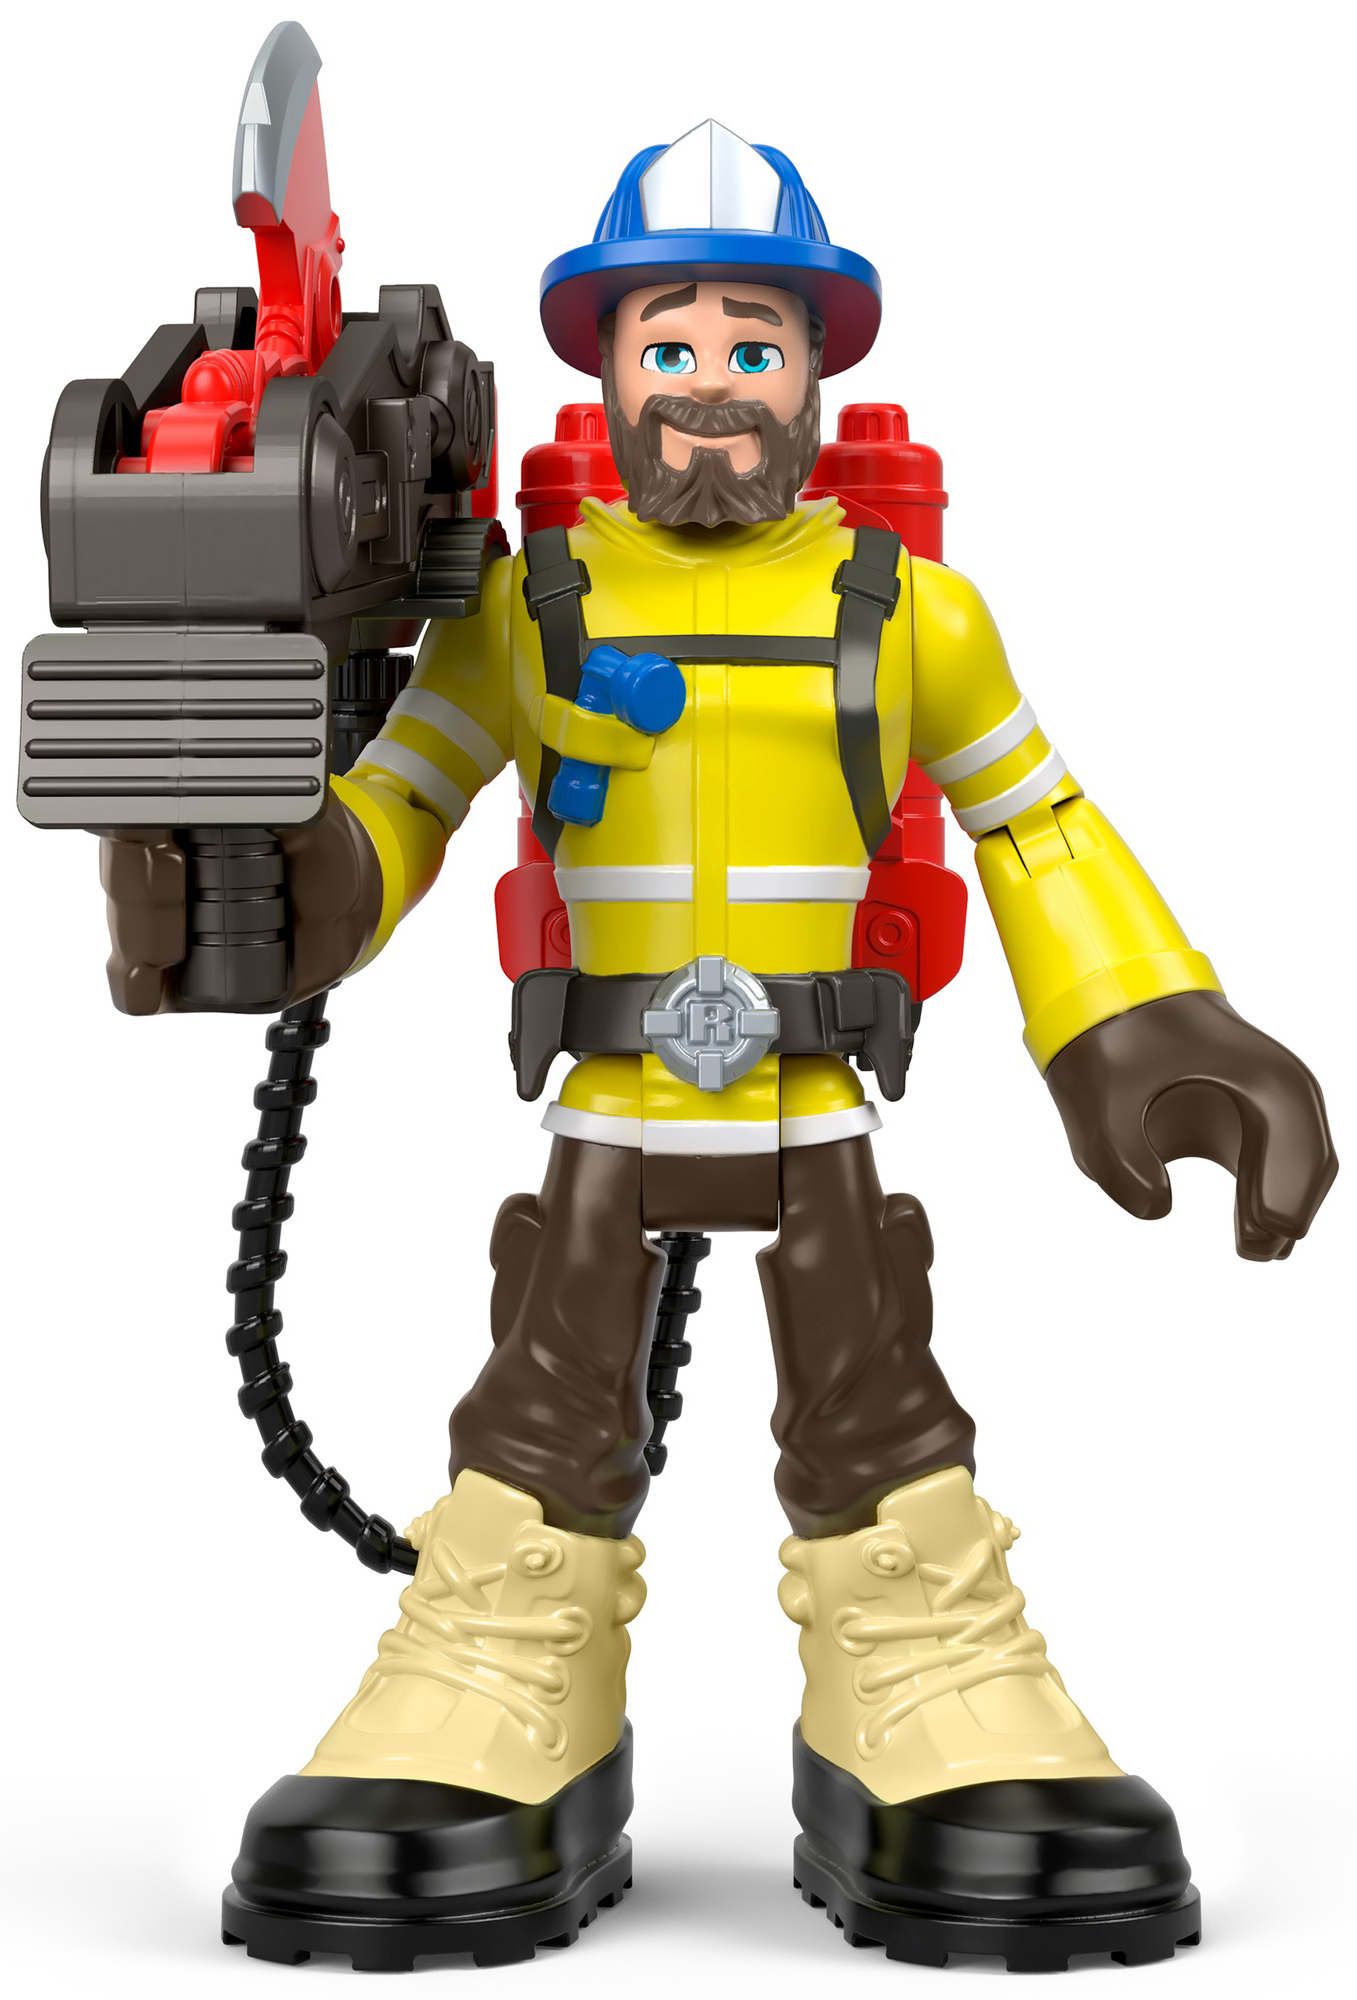 Fisher-Price Rescue Heroes Forrest Fuego Firefighter Figure Set - image 1 of 7